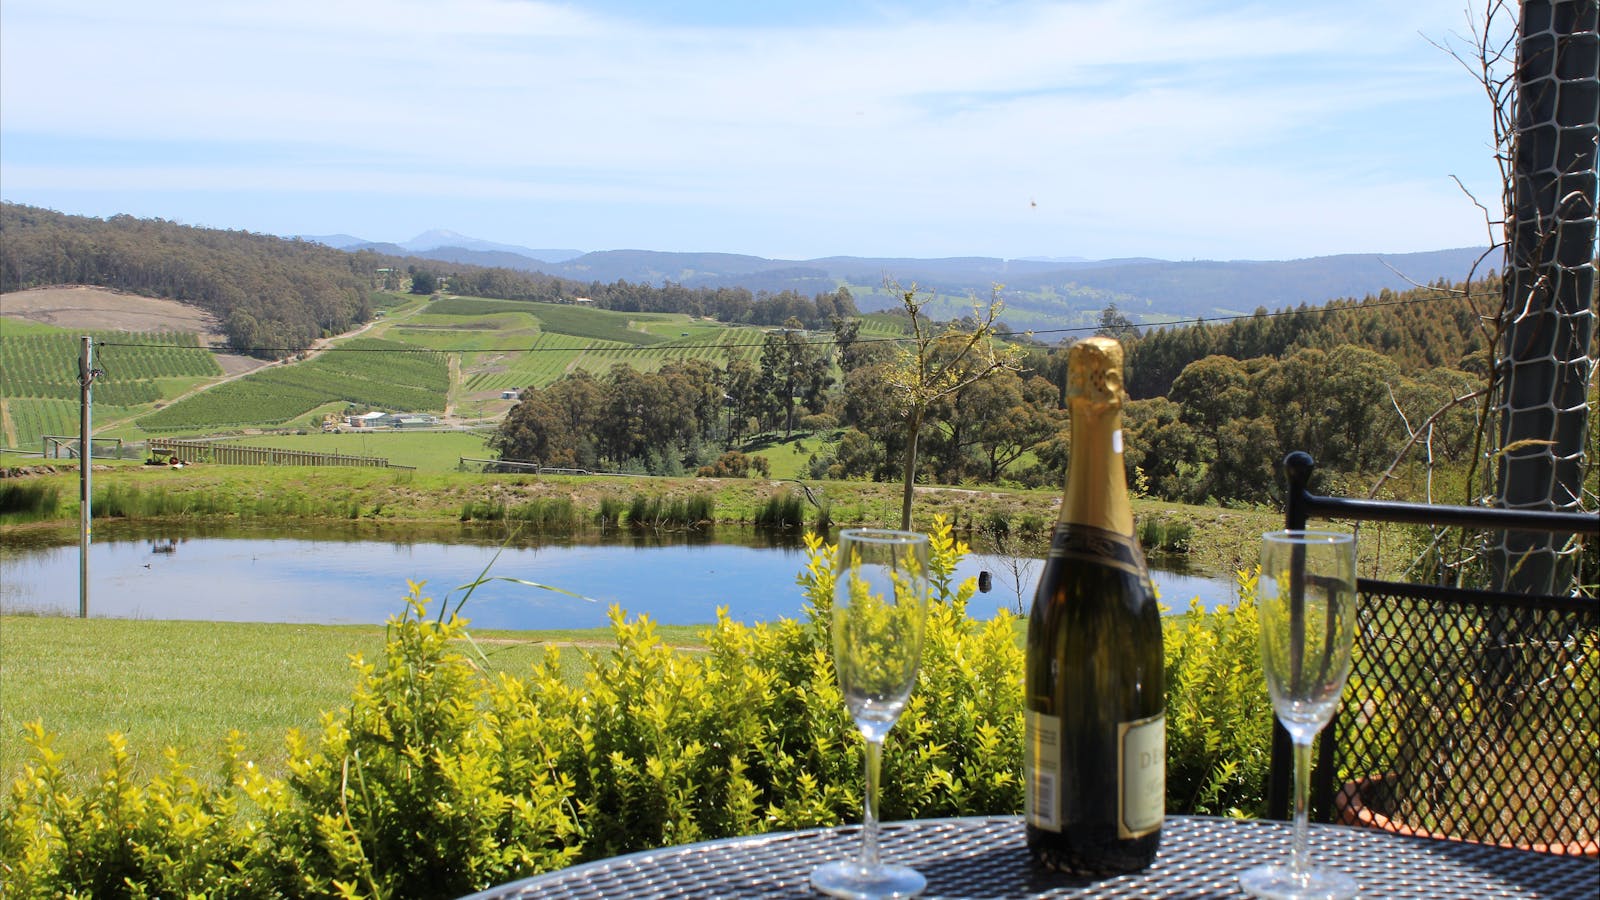 Relax out on the patio and take in the view of the orchards and the valley